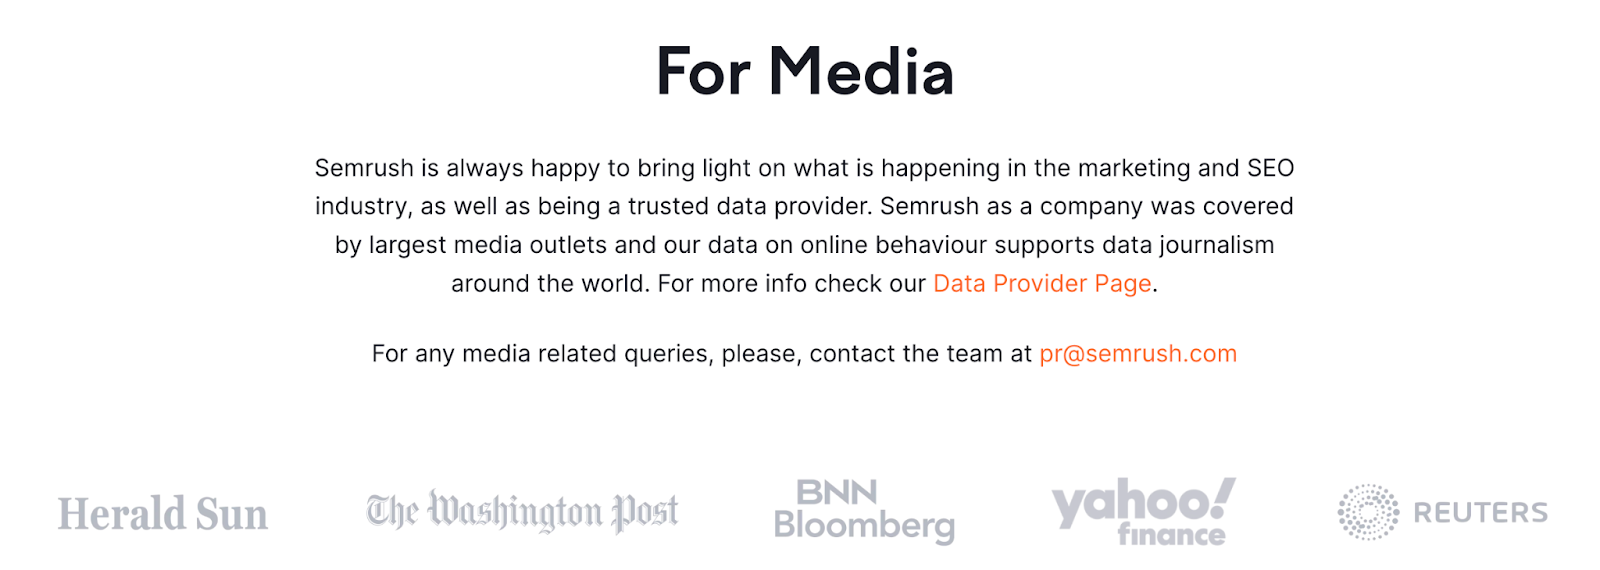 "For Media" section of Semrush’s “About us” page